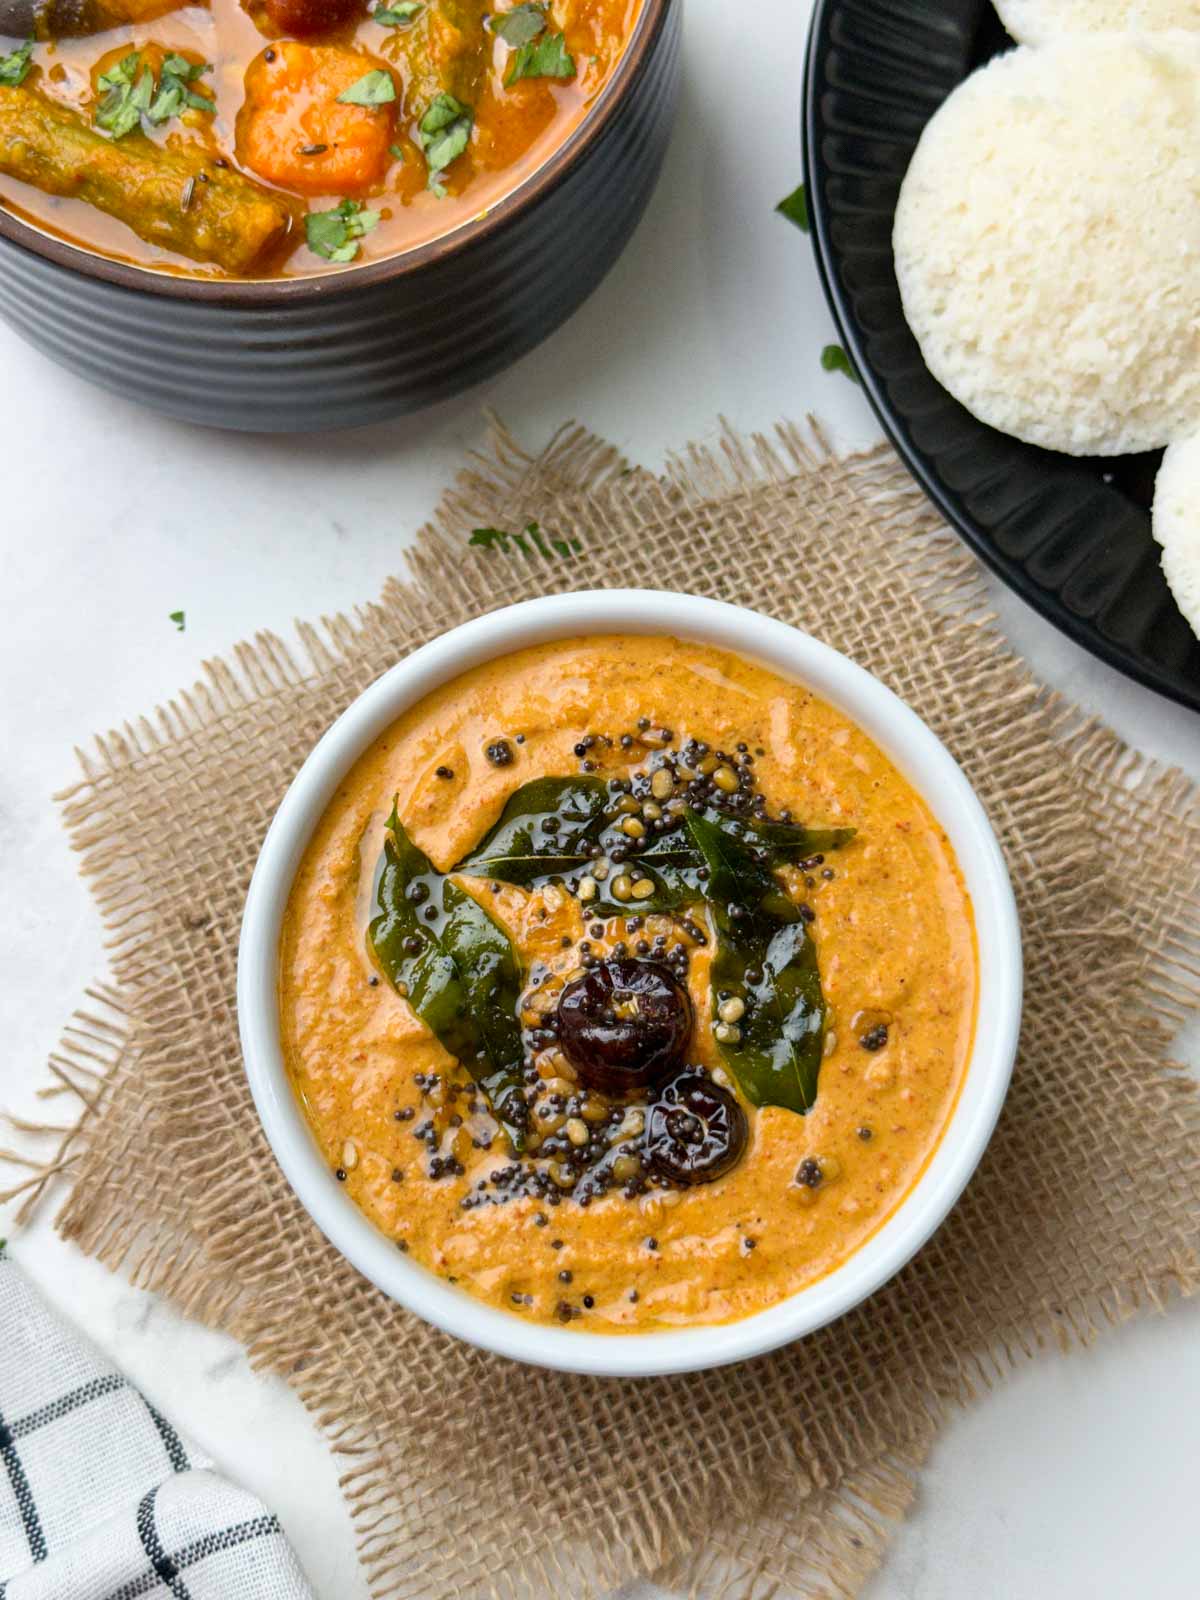 Peanut Chutney served in a white bowl with idli and vegetable sambar on the side